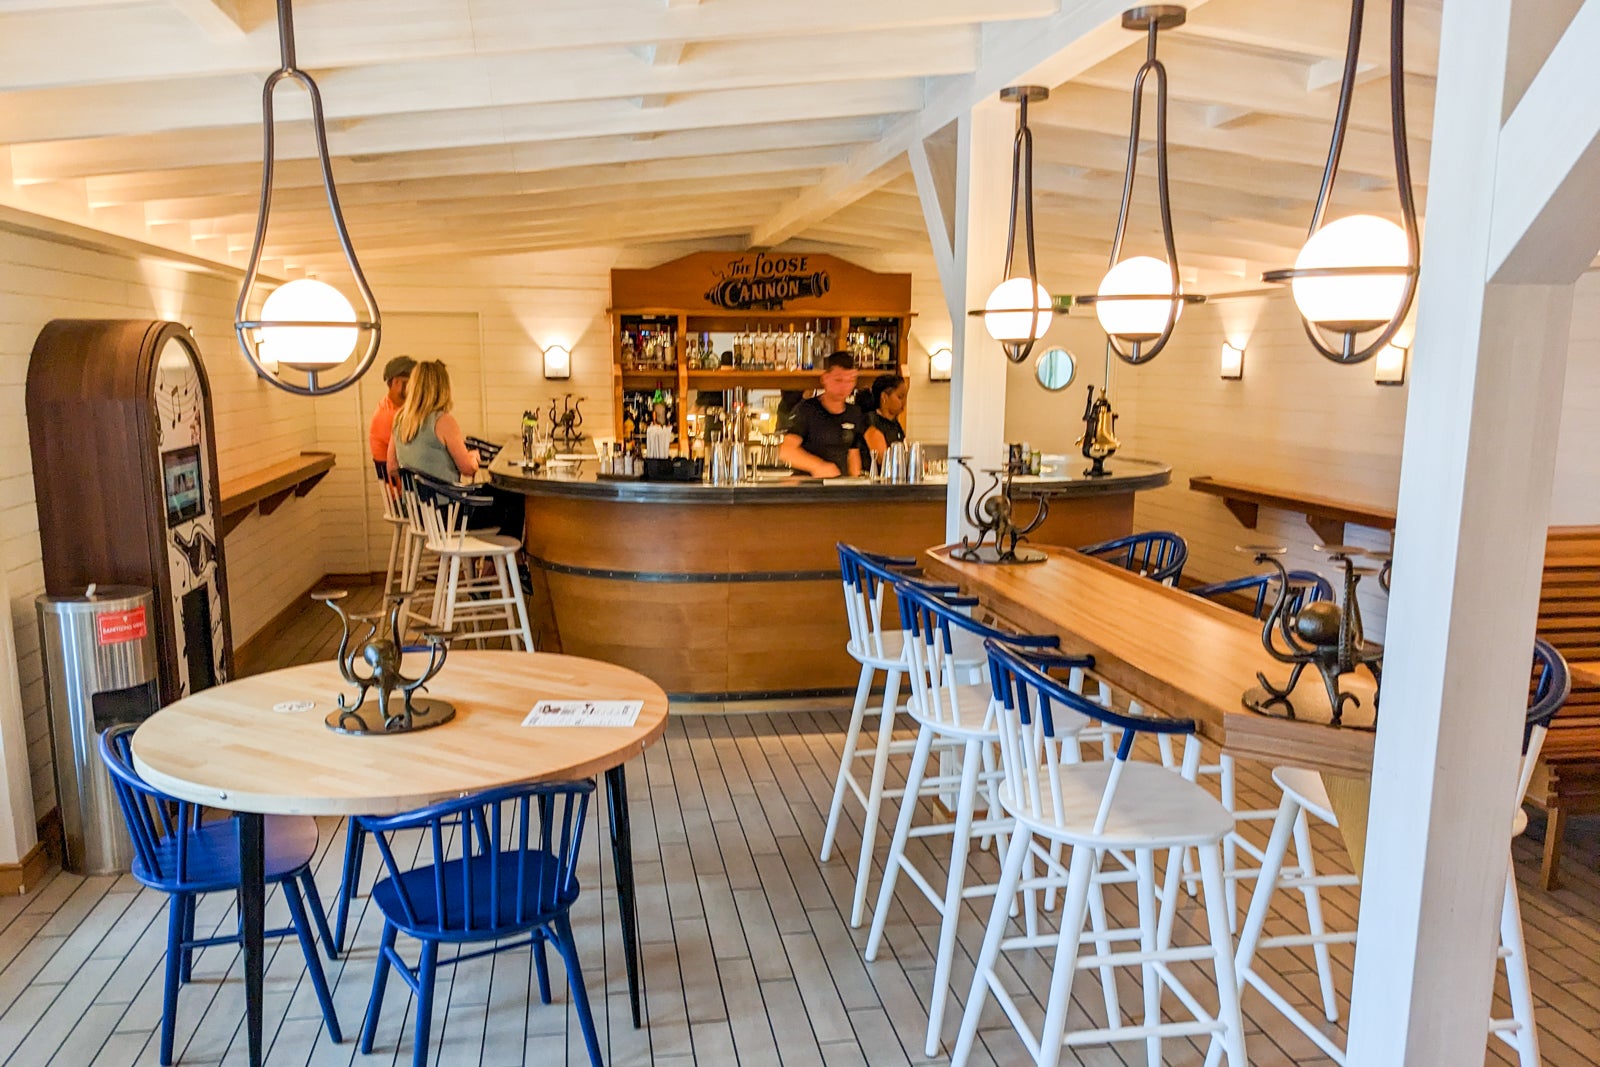 Nautical themed bar with two people sitting at bar counter